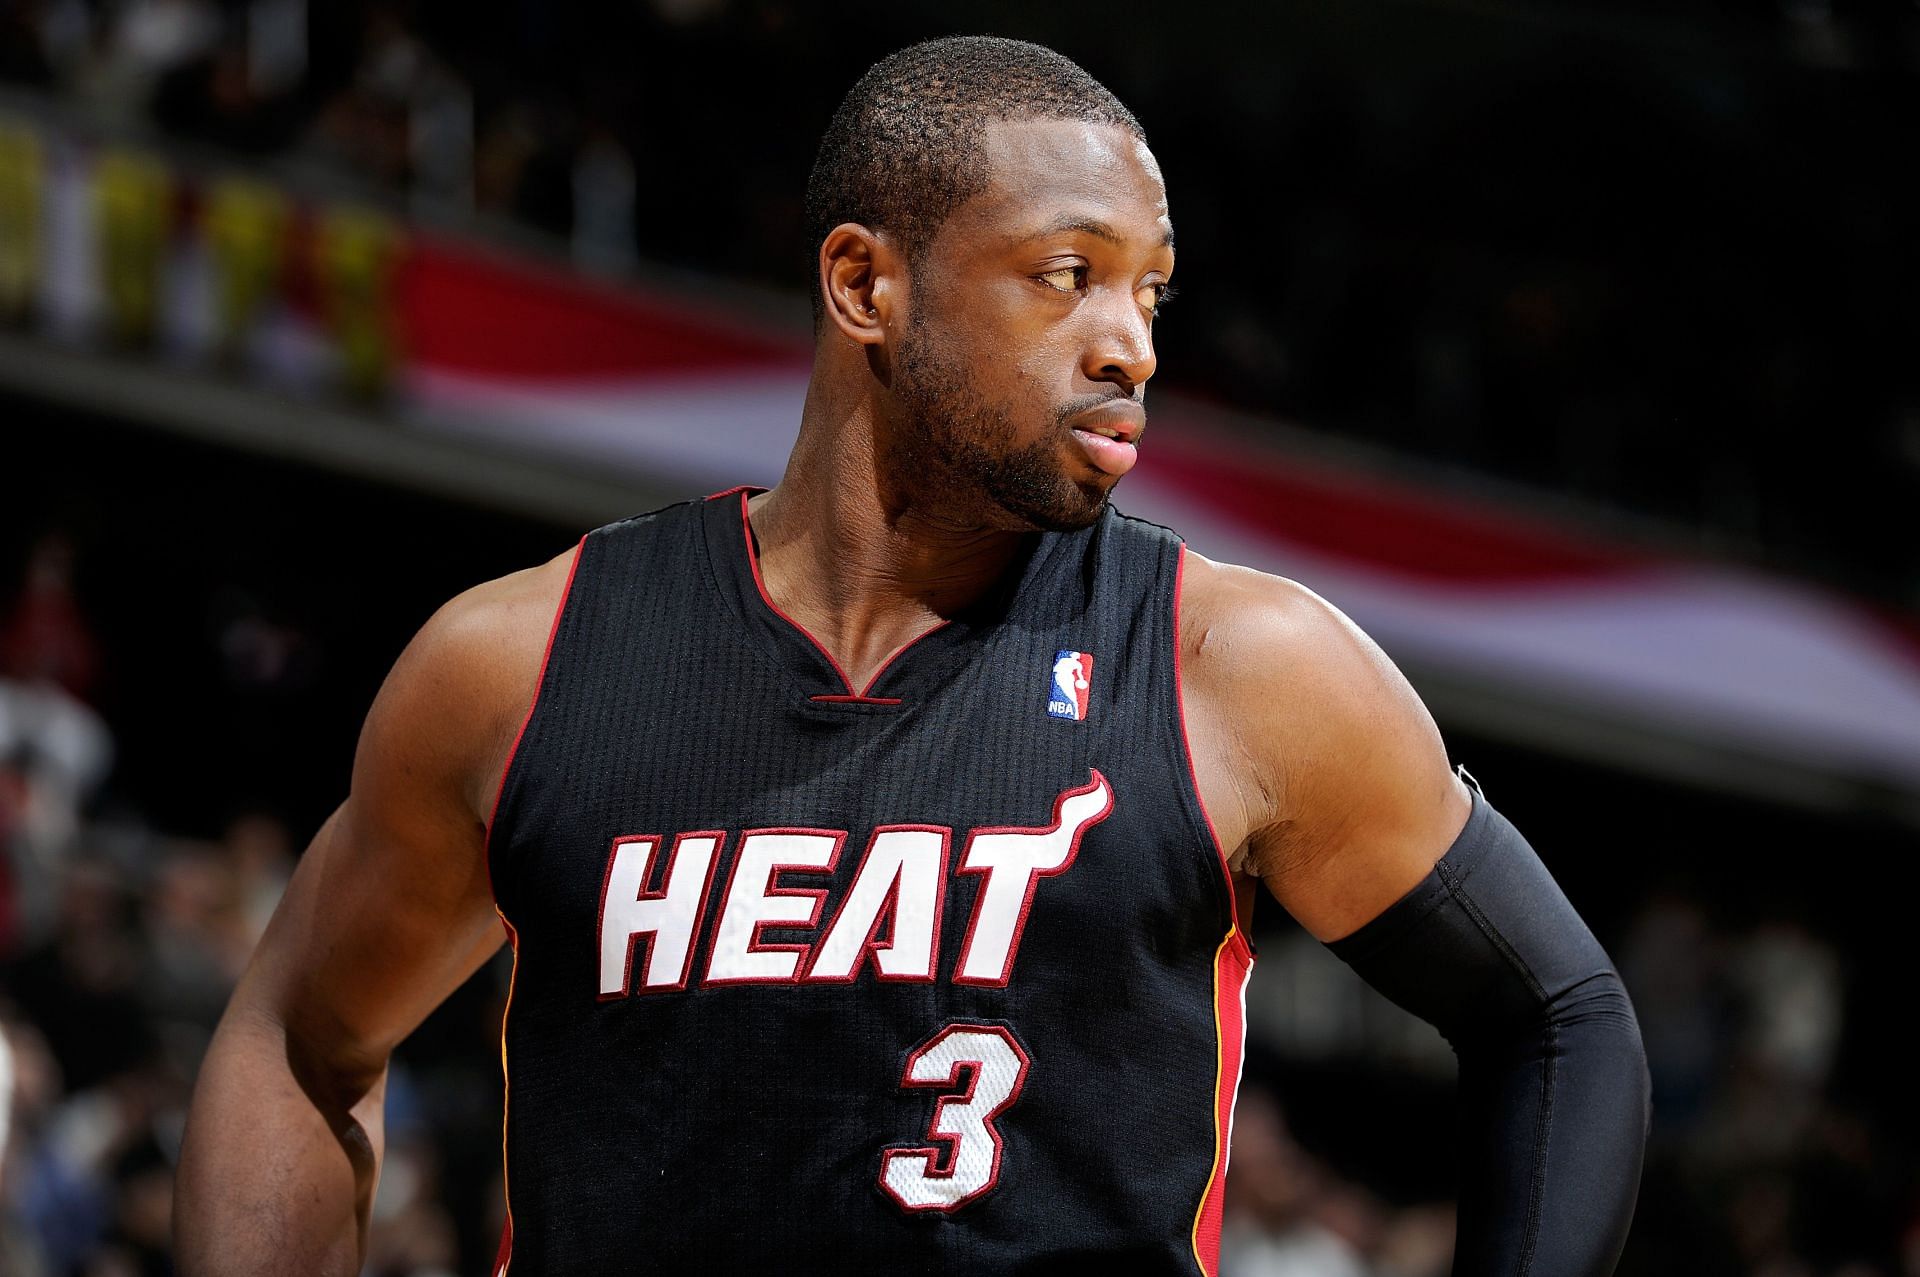 Wade led the Heat to their first-ever NBA championship in 2006 (Image via Getty Images)